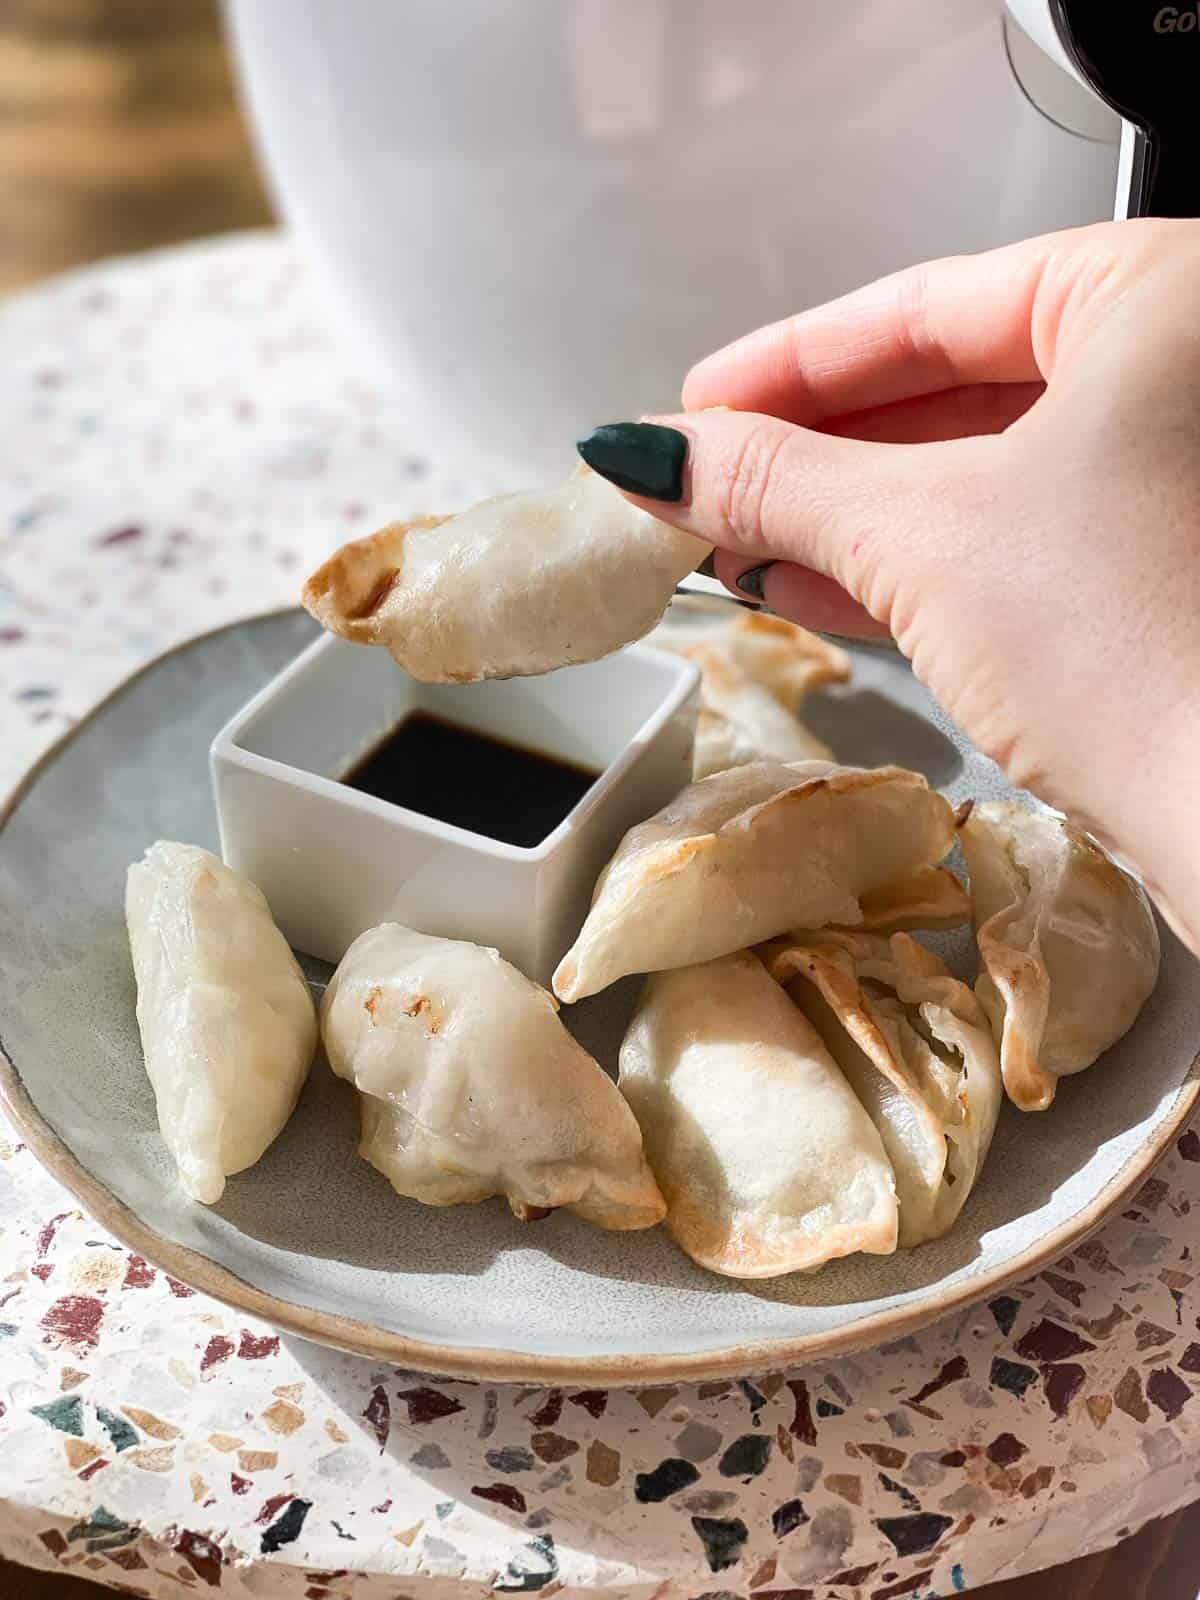 potsticker about to be dipped in soy sauce on a plate with other potstickers